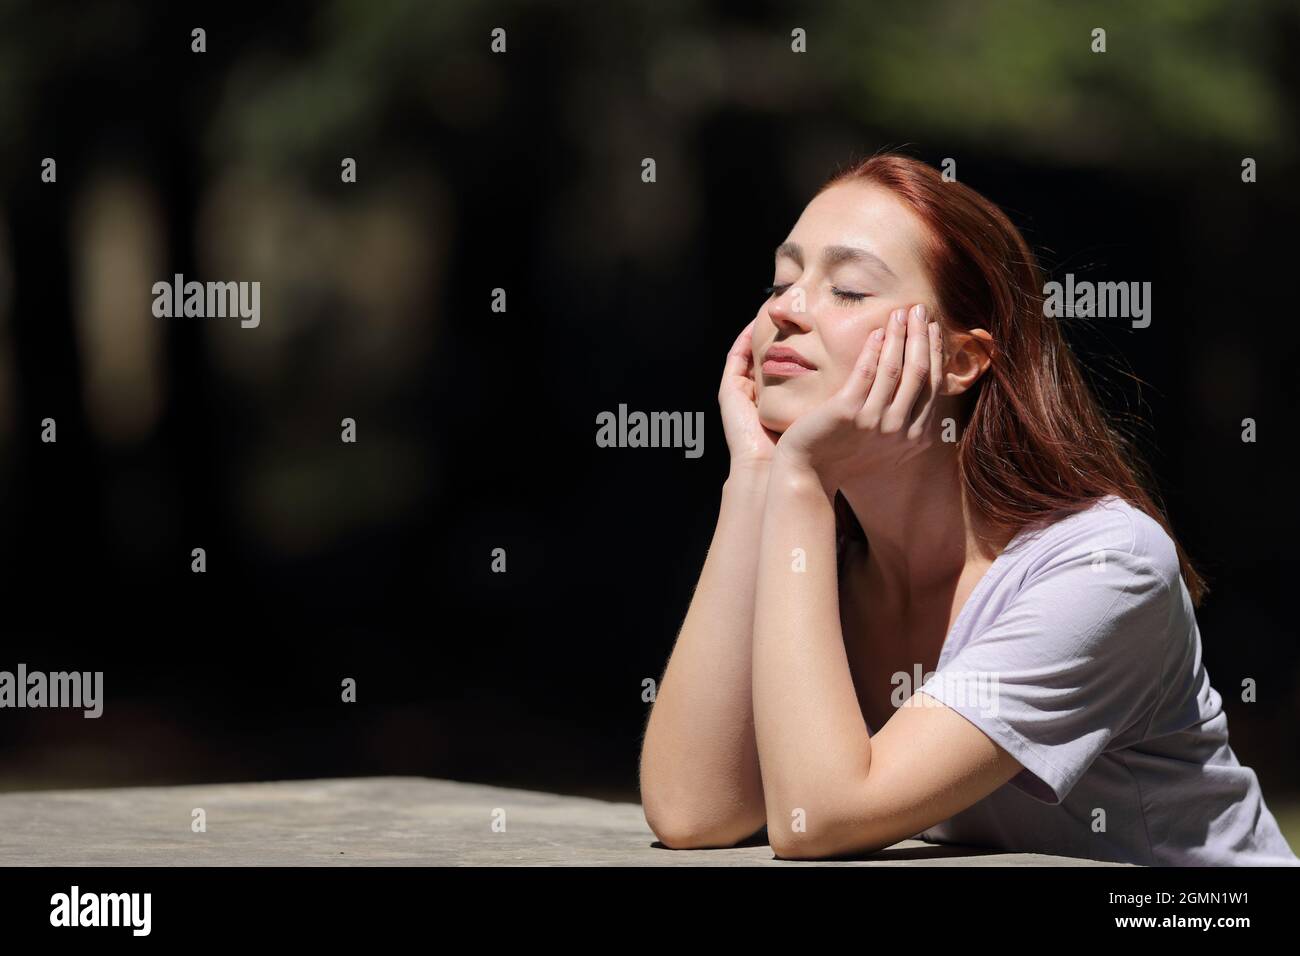 Woman with closed eyes relaxing and heating a sunny day in a park Stock Photo